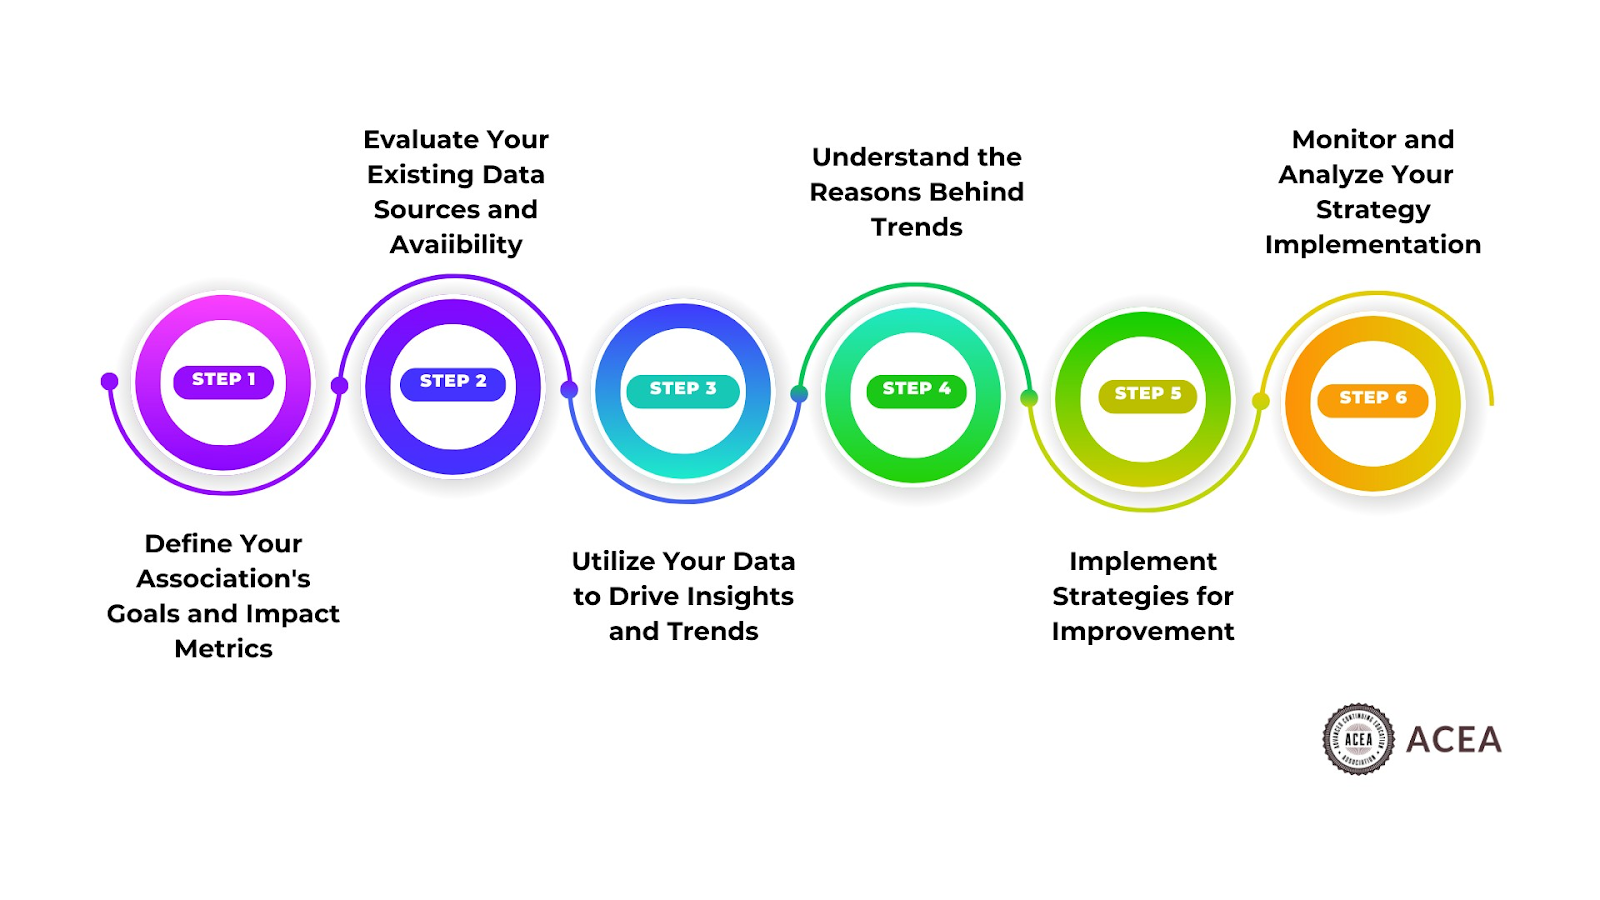 Roadmap to Data-Driven Growth for Associations